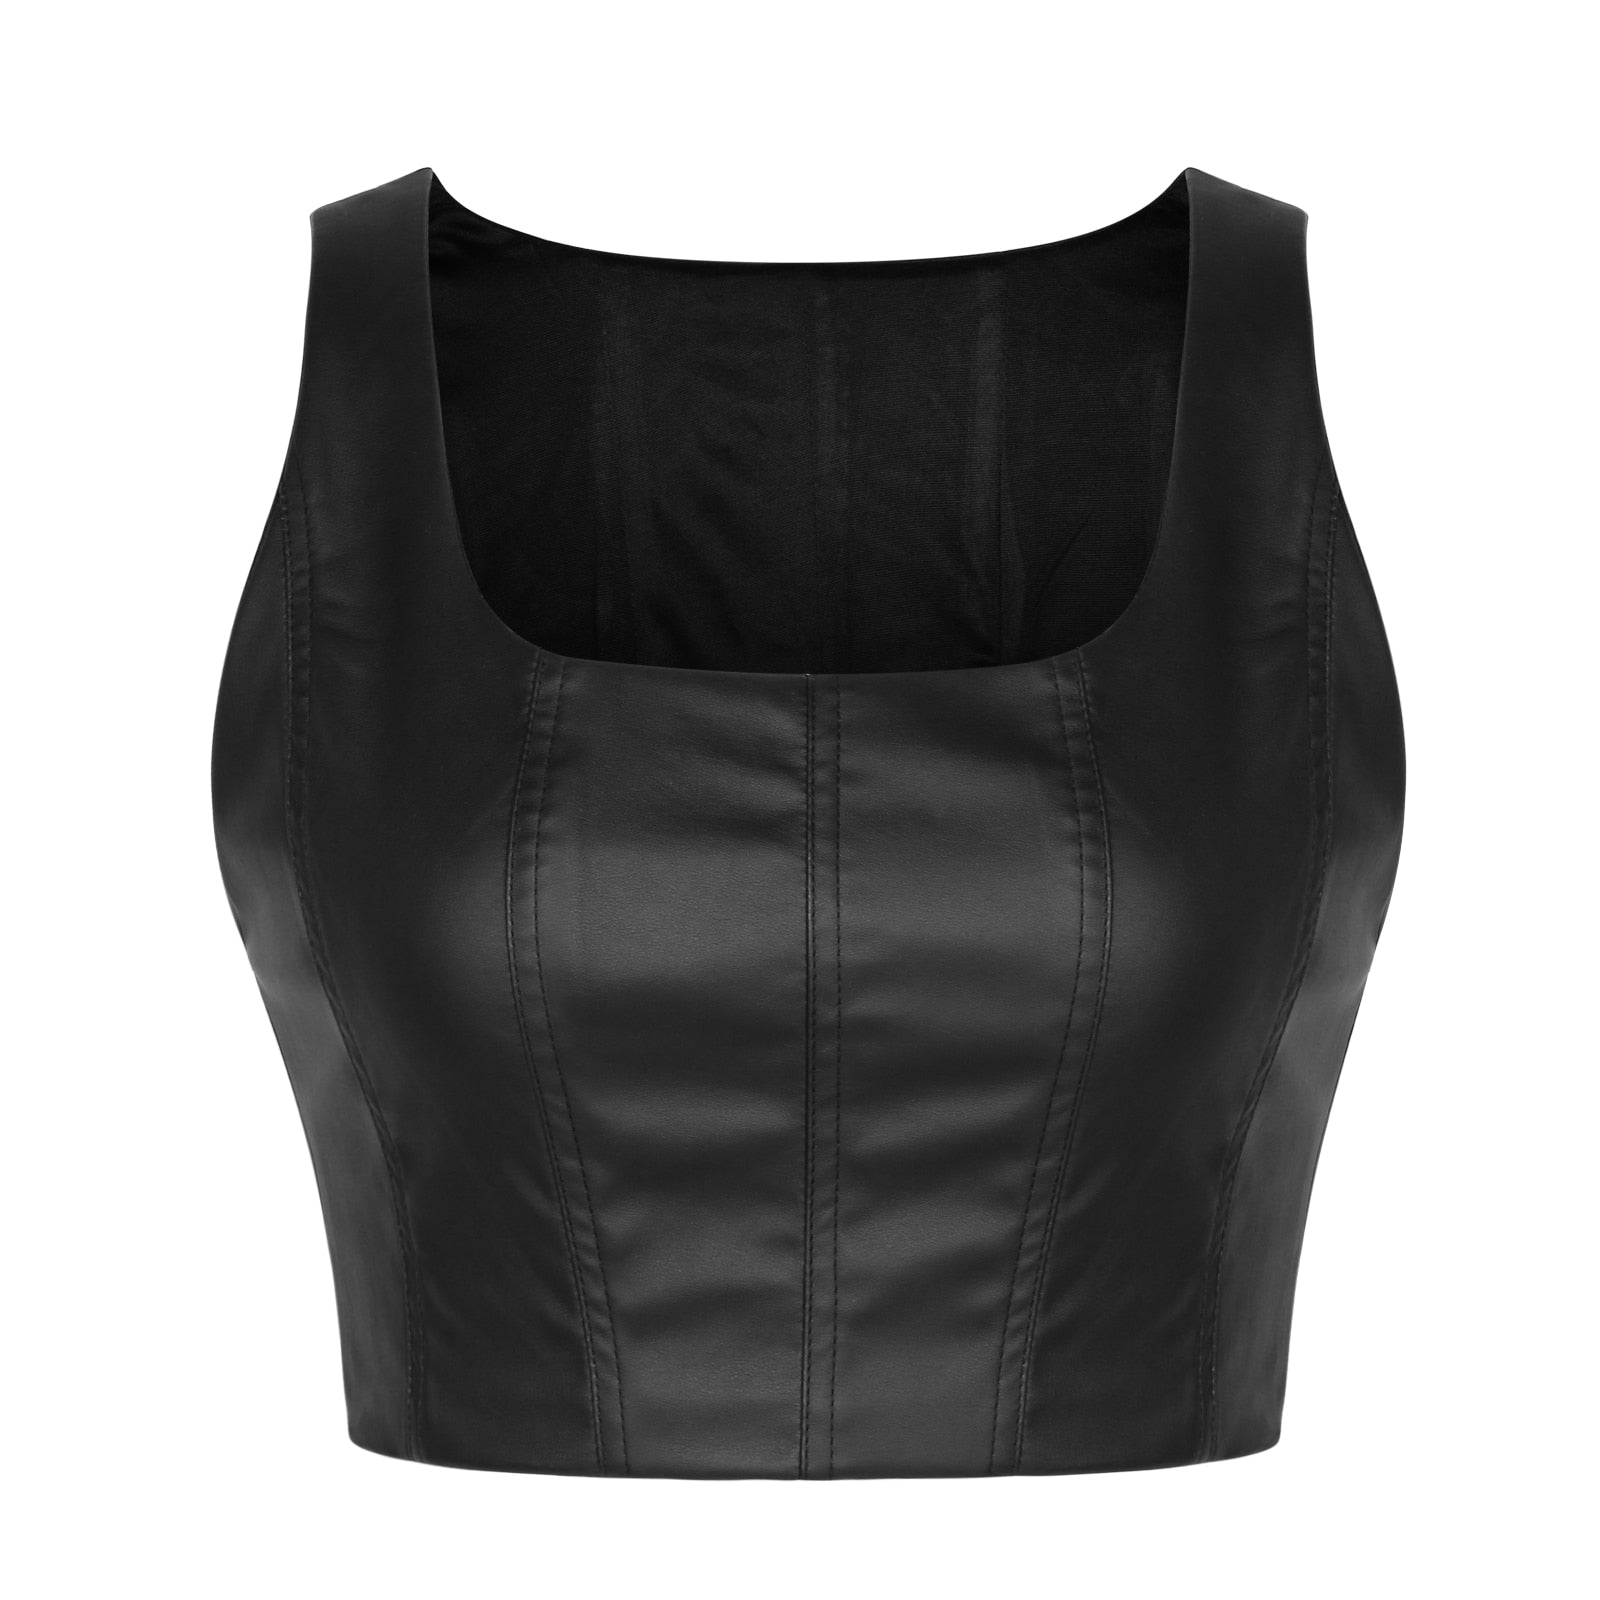 Mojoyce Womens Sexy PU Leather Clothes Square Neck Sleeveless Tank Tops Crop Top Can Match Pleated Short Mini Skirt